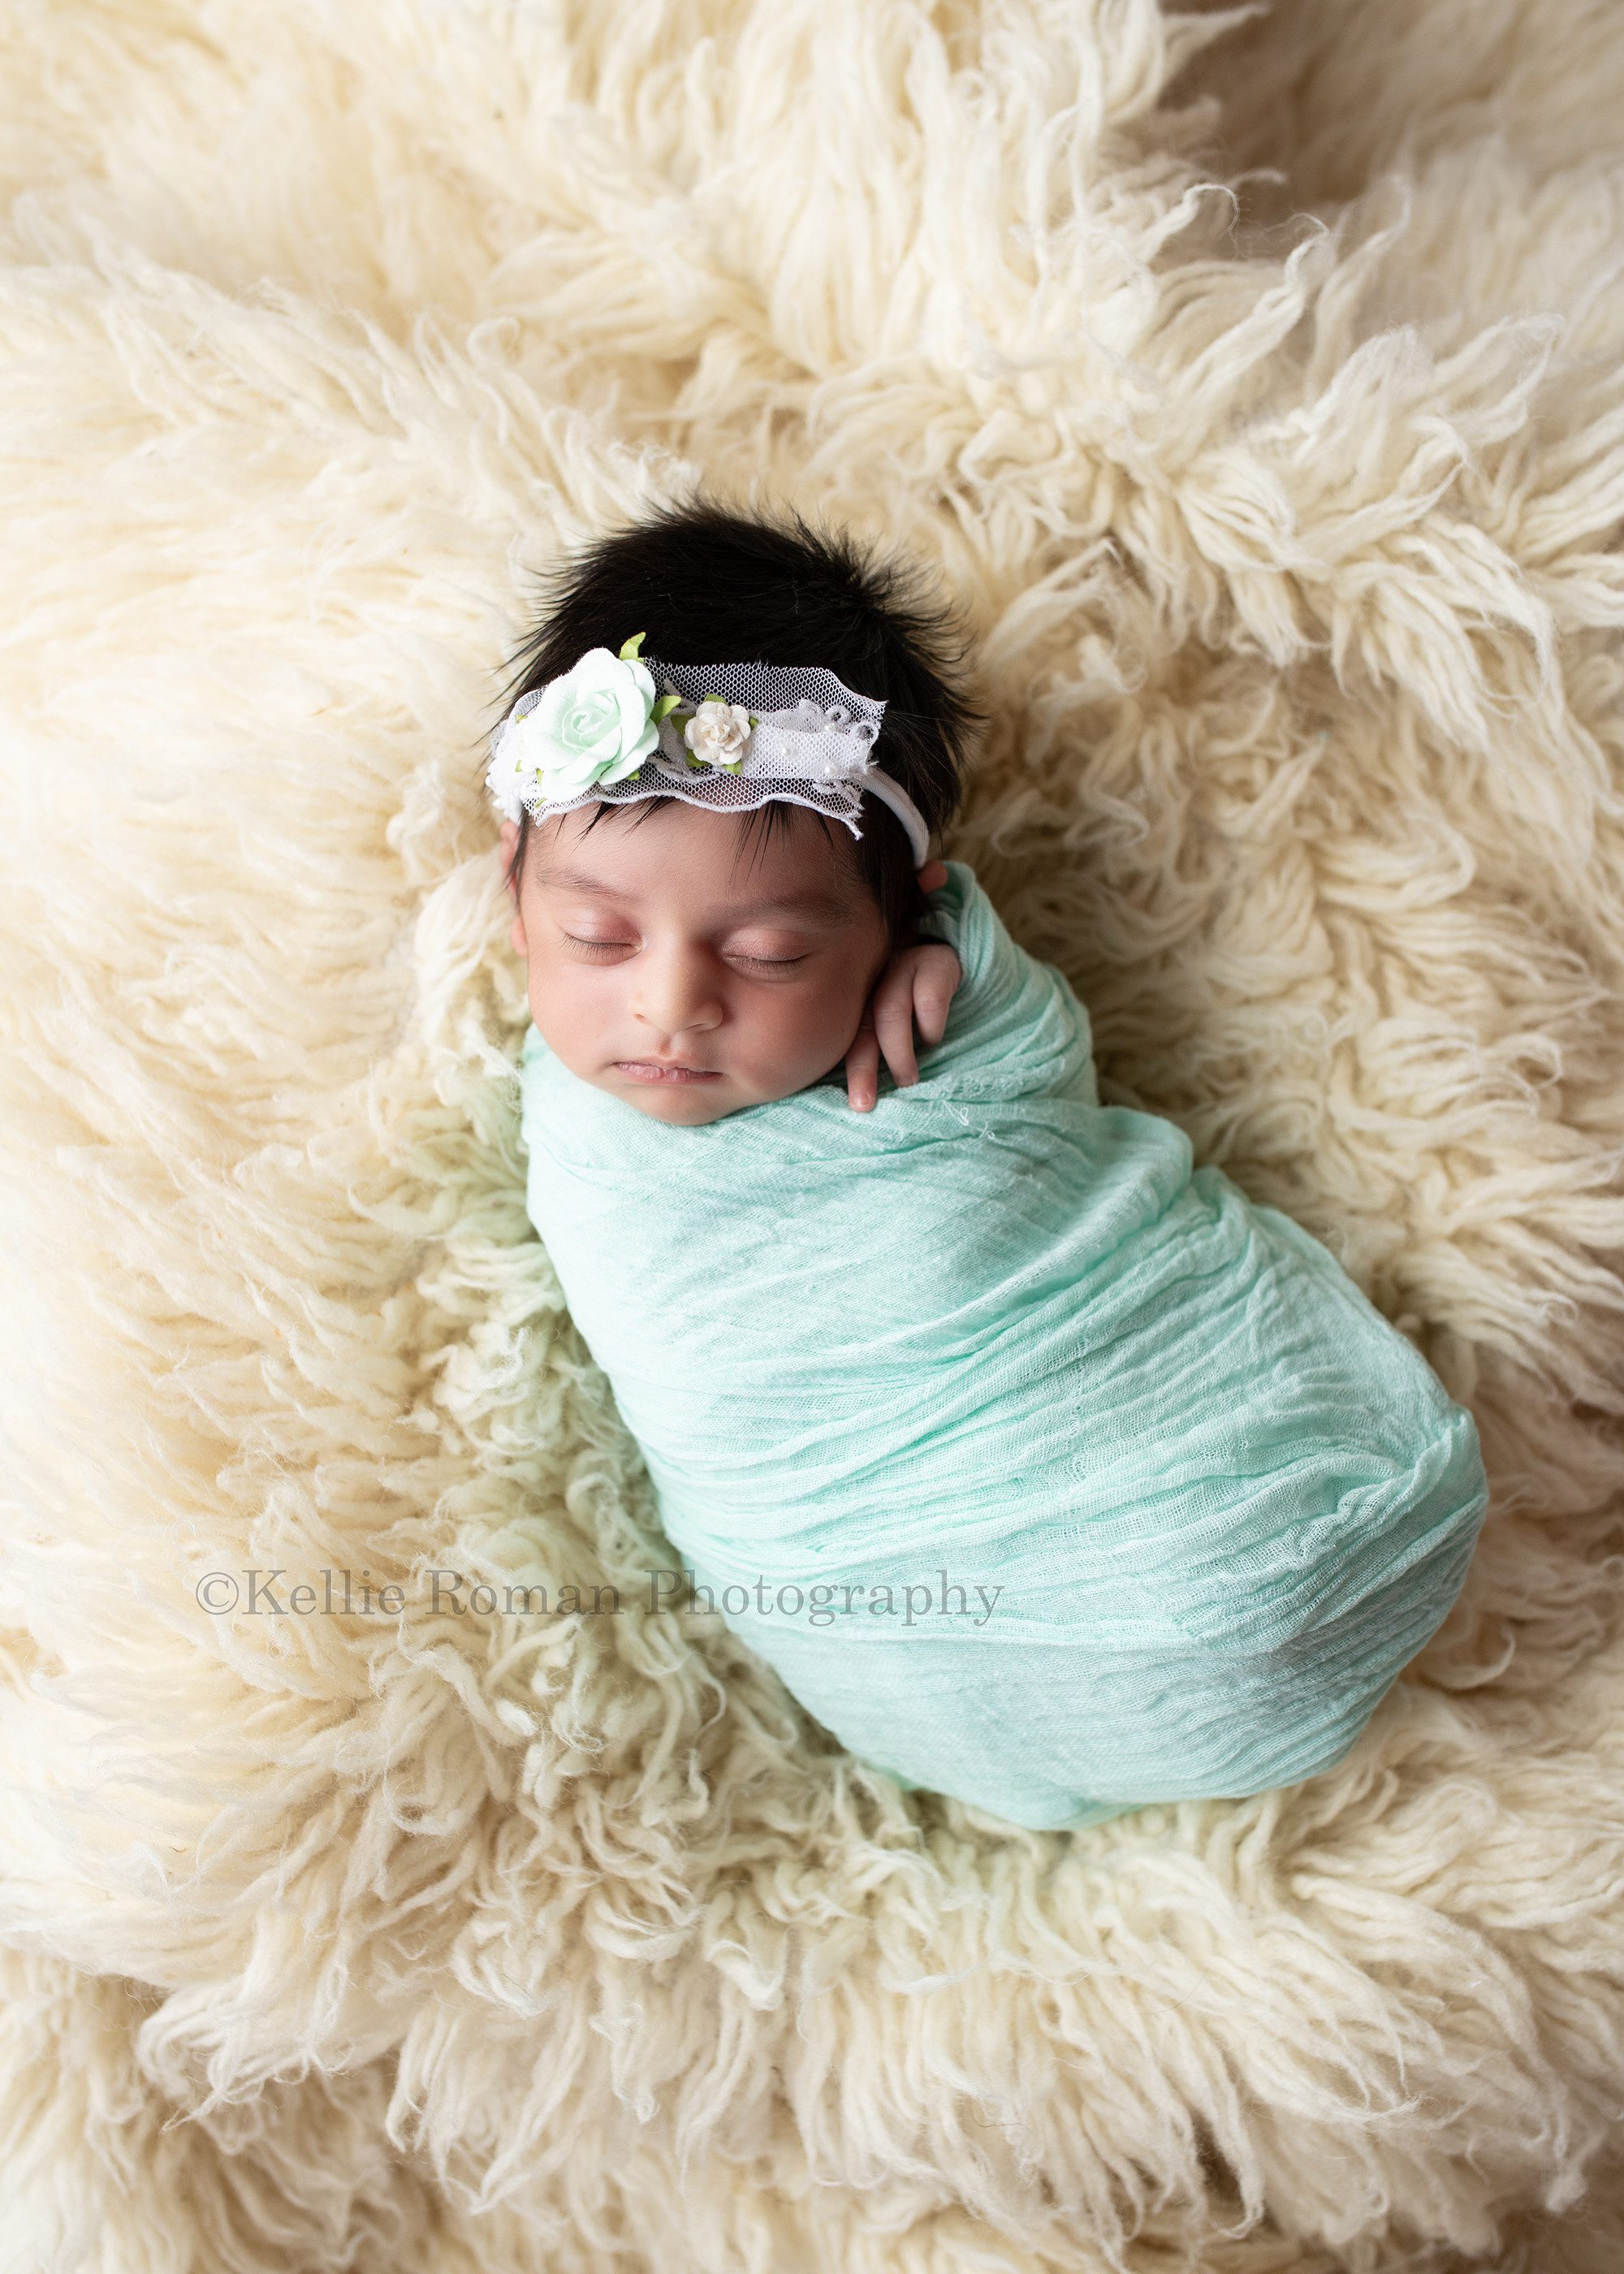 all wrapped up a newborn little baby girl is in a milwaukee photographer studio. the studio is in greendale Wisconsin. the baby is wrapped tight in a teal swaddle fabric and has on a white and teal flower headband. the baby girl is sleeping onto of a cream color flakoti rug